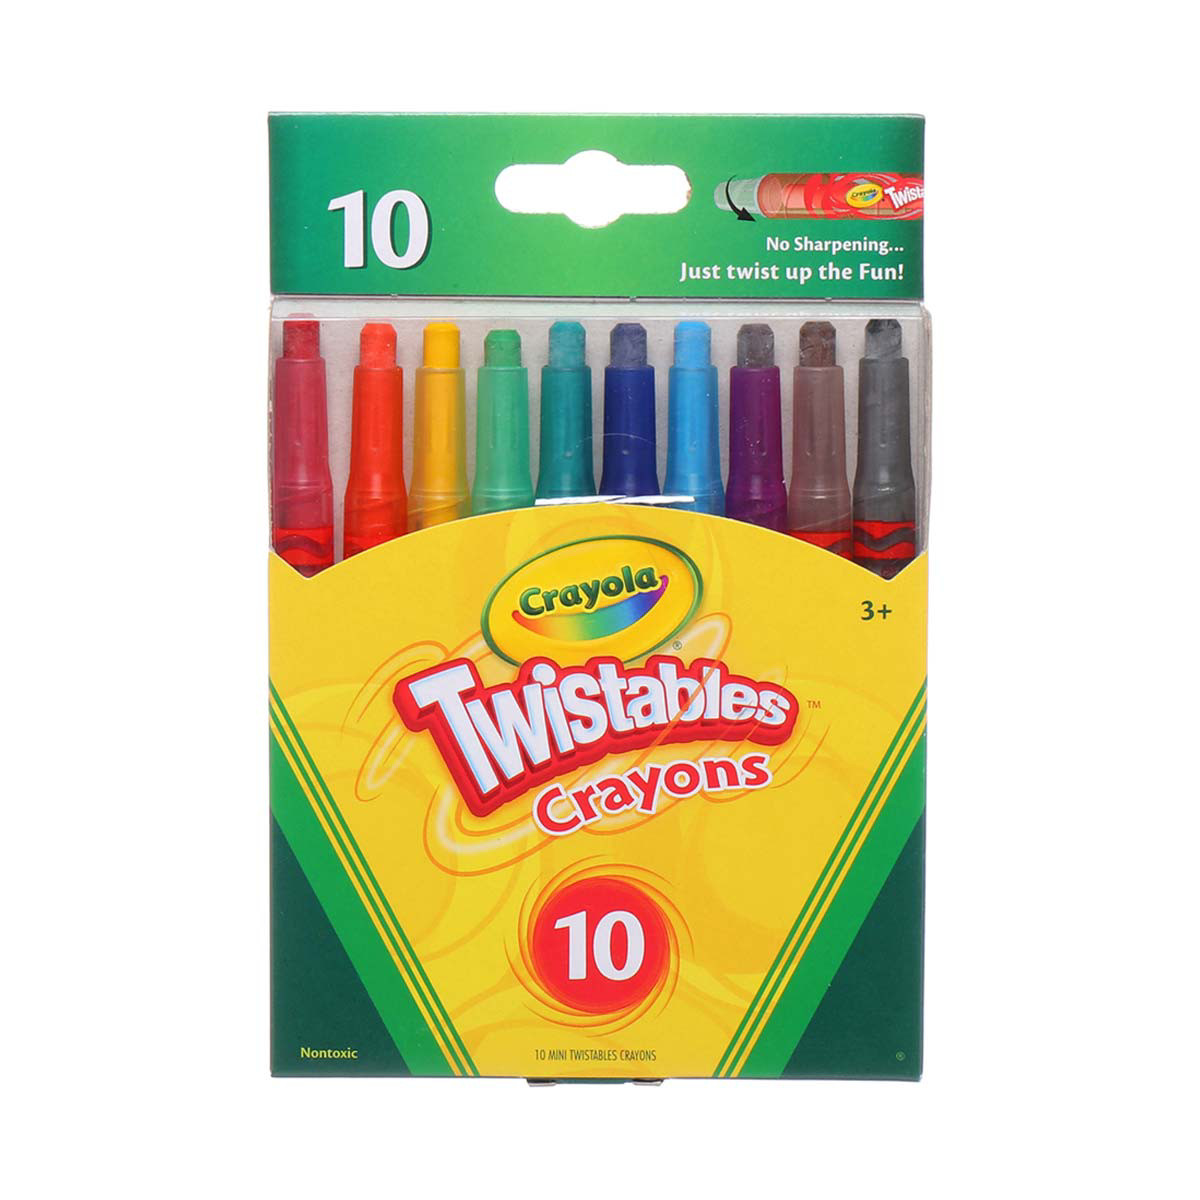  Crayola Crayons,8 Count (3 Pack), Pack of 3, 3 Piece